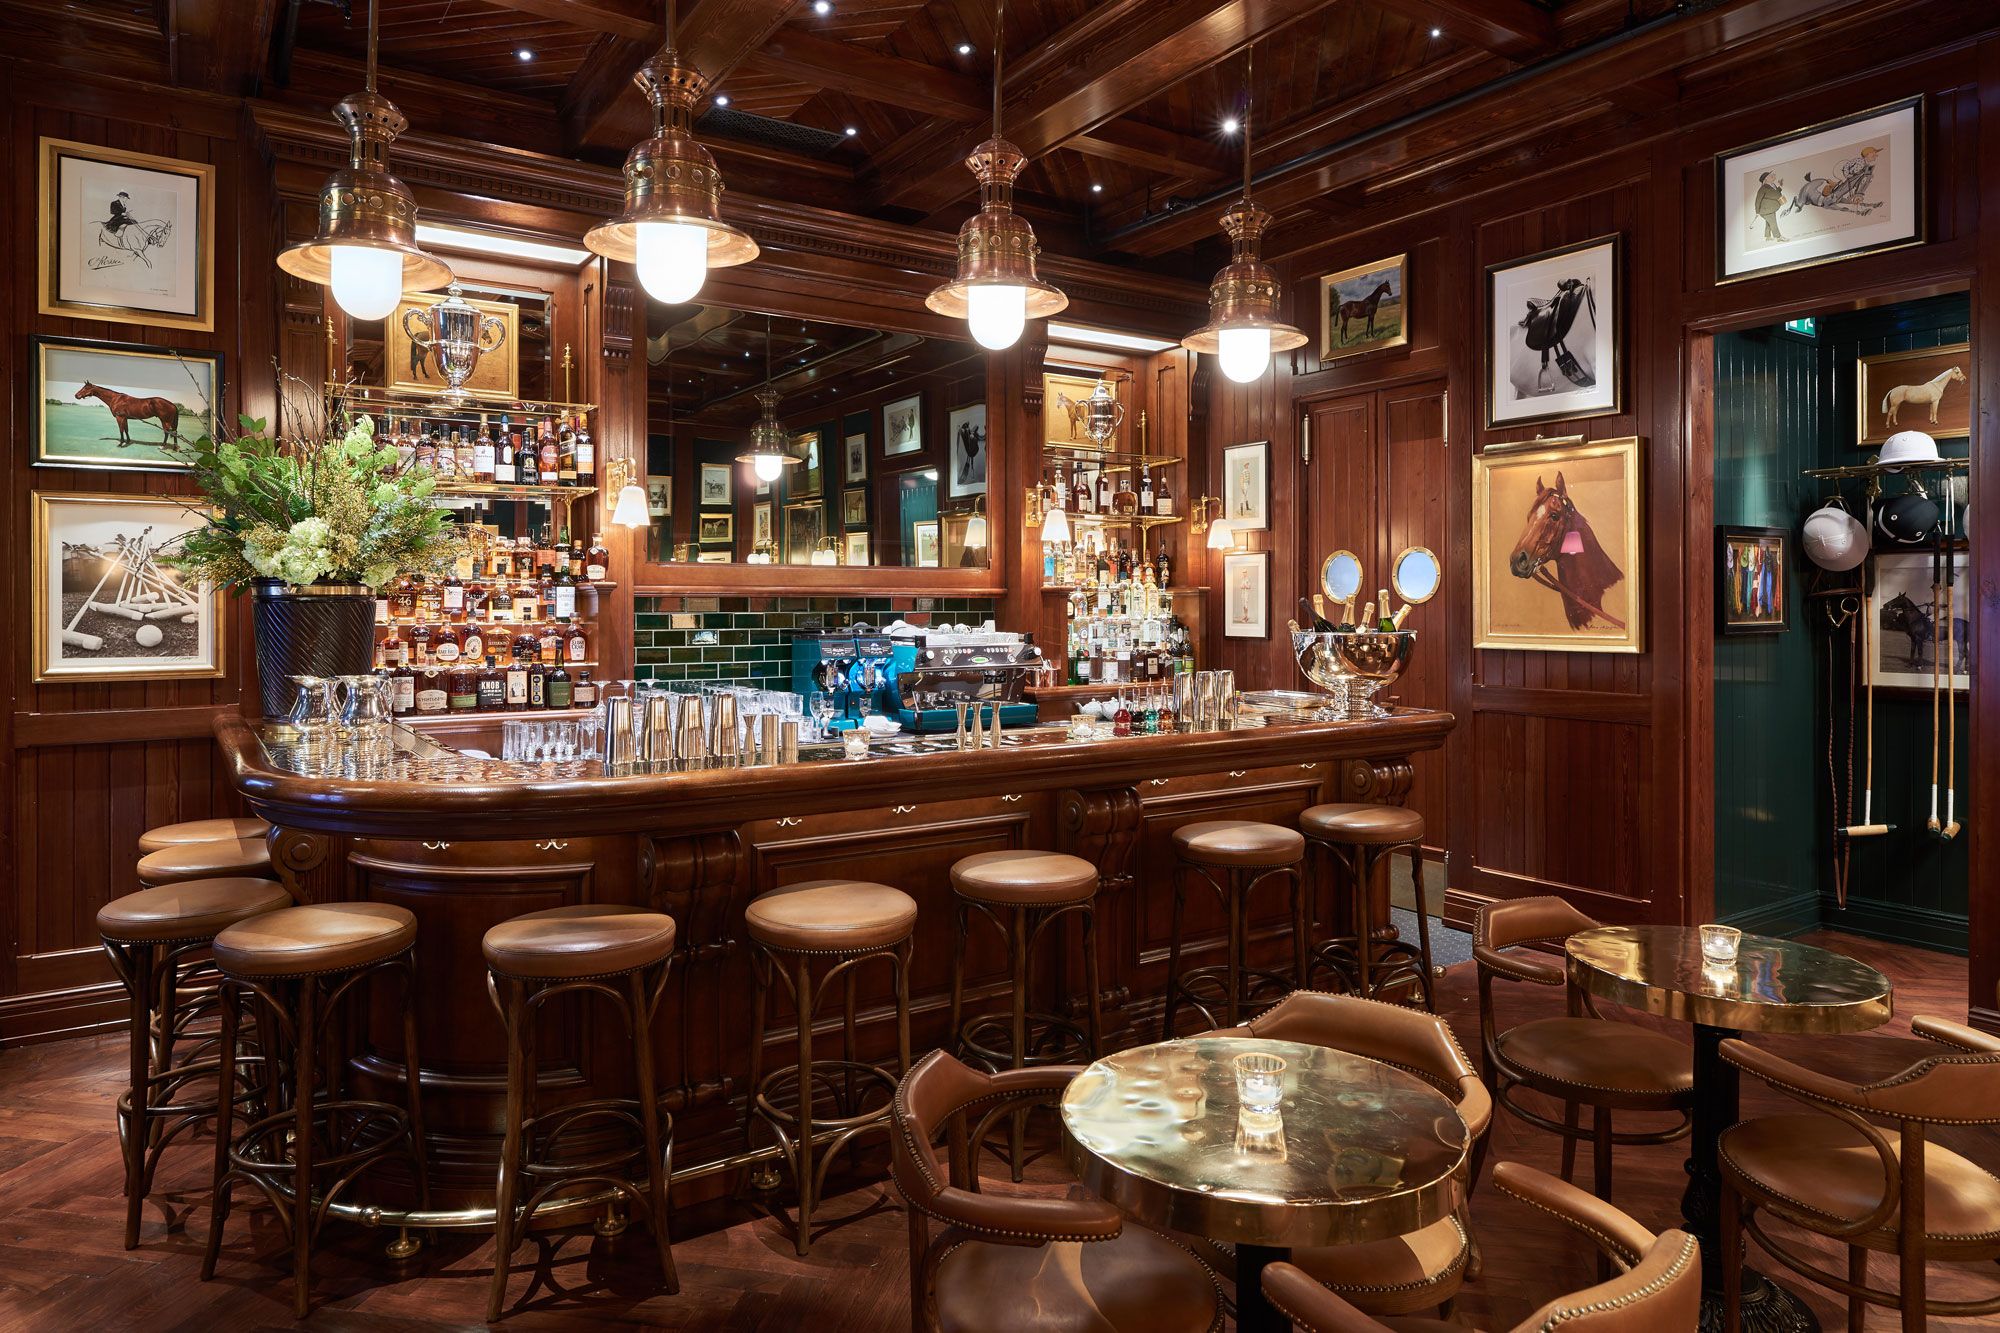 Ralph Lauren Opens Polo Bar and NY Celebs Flock to It